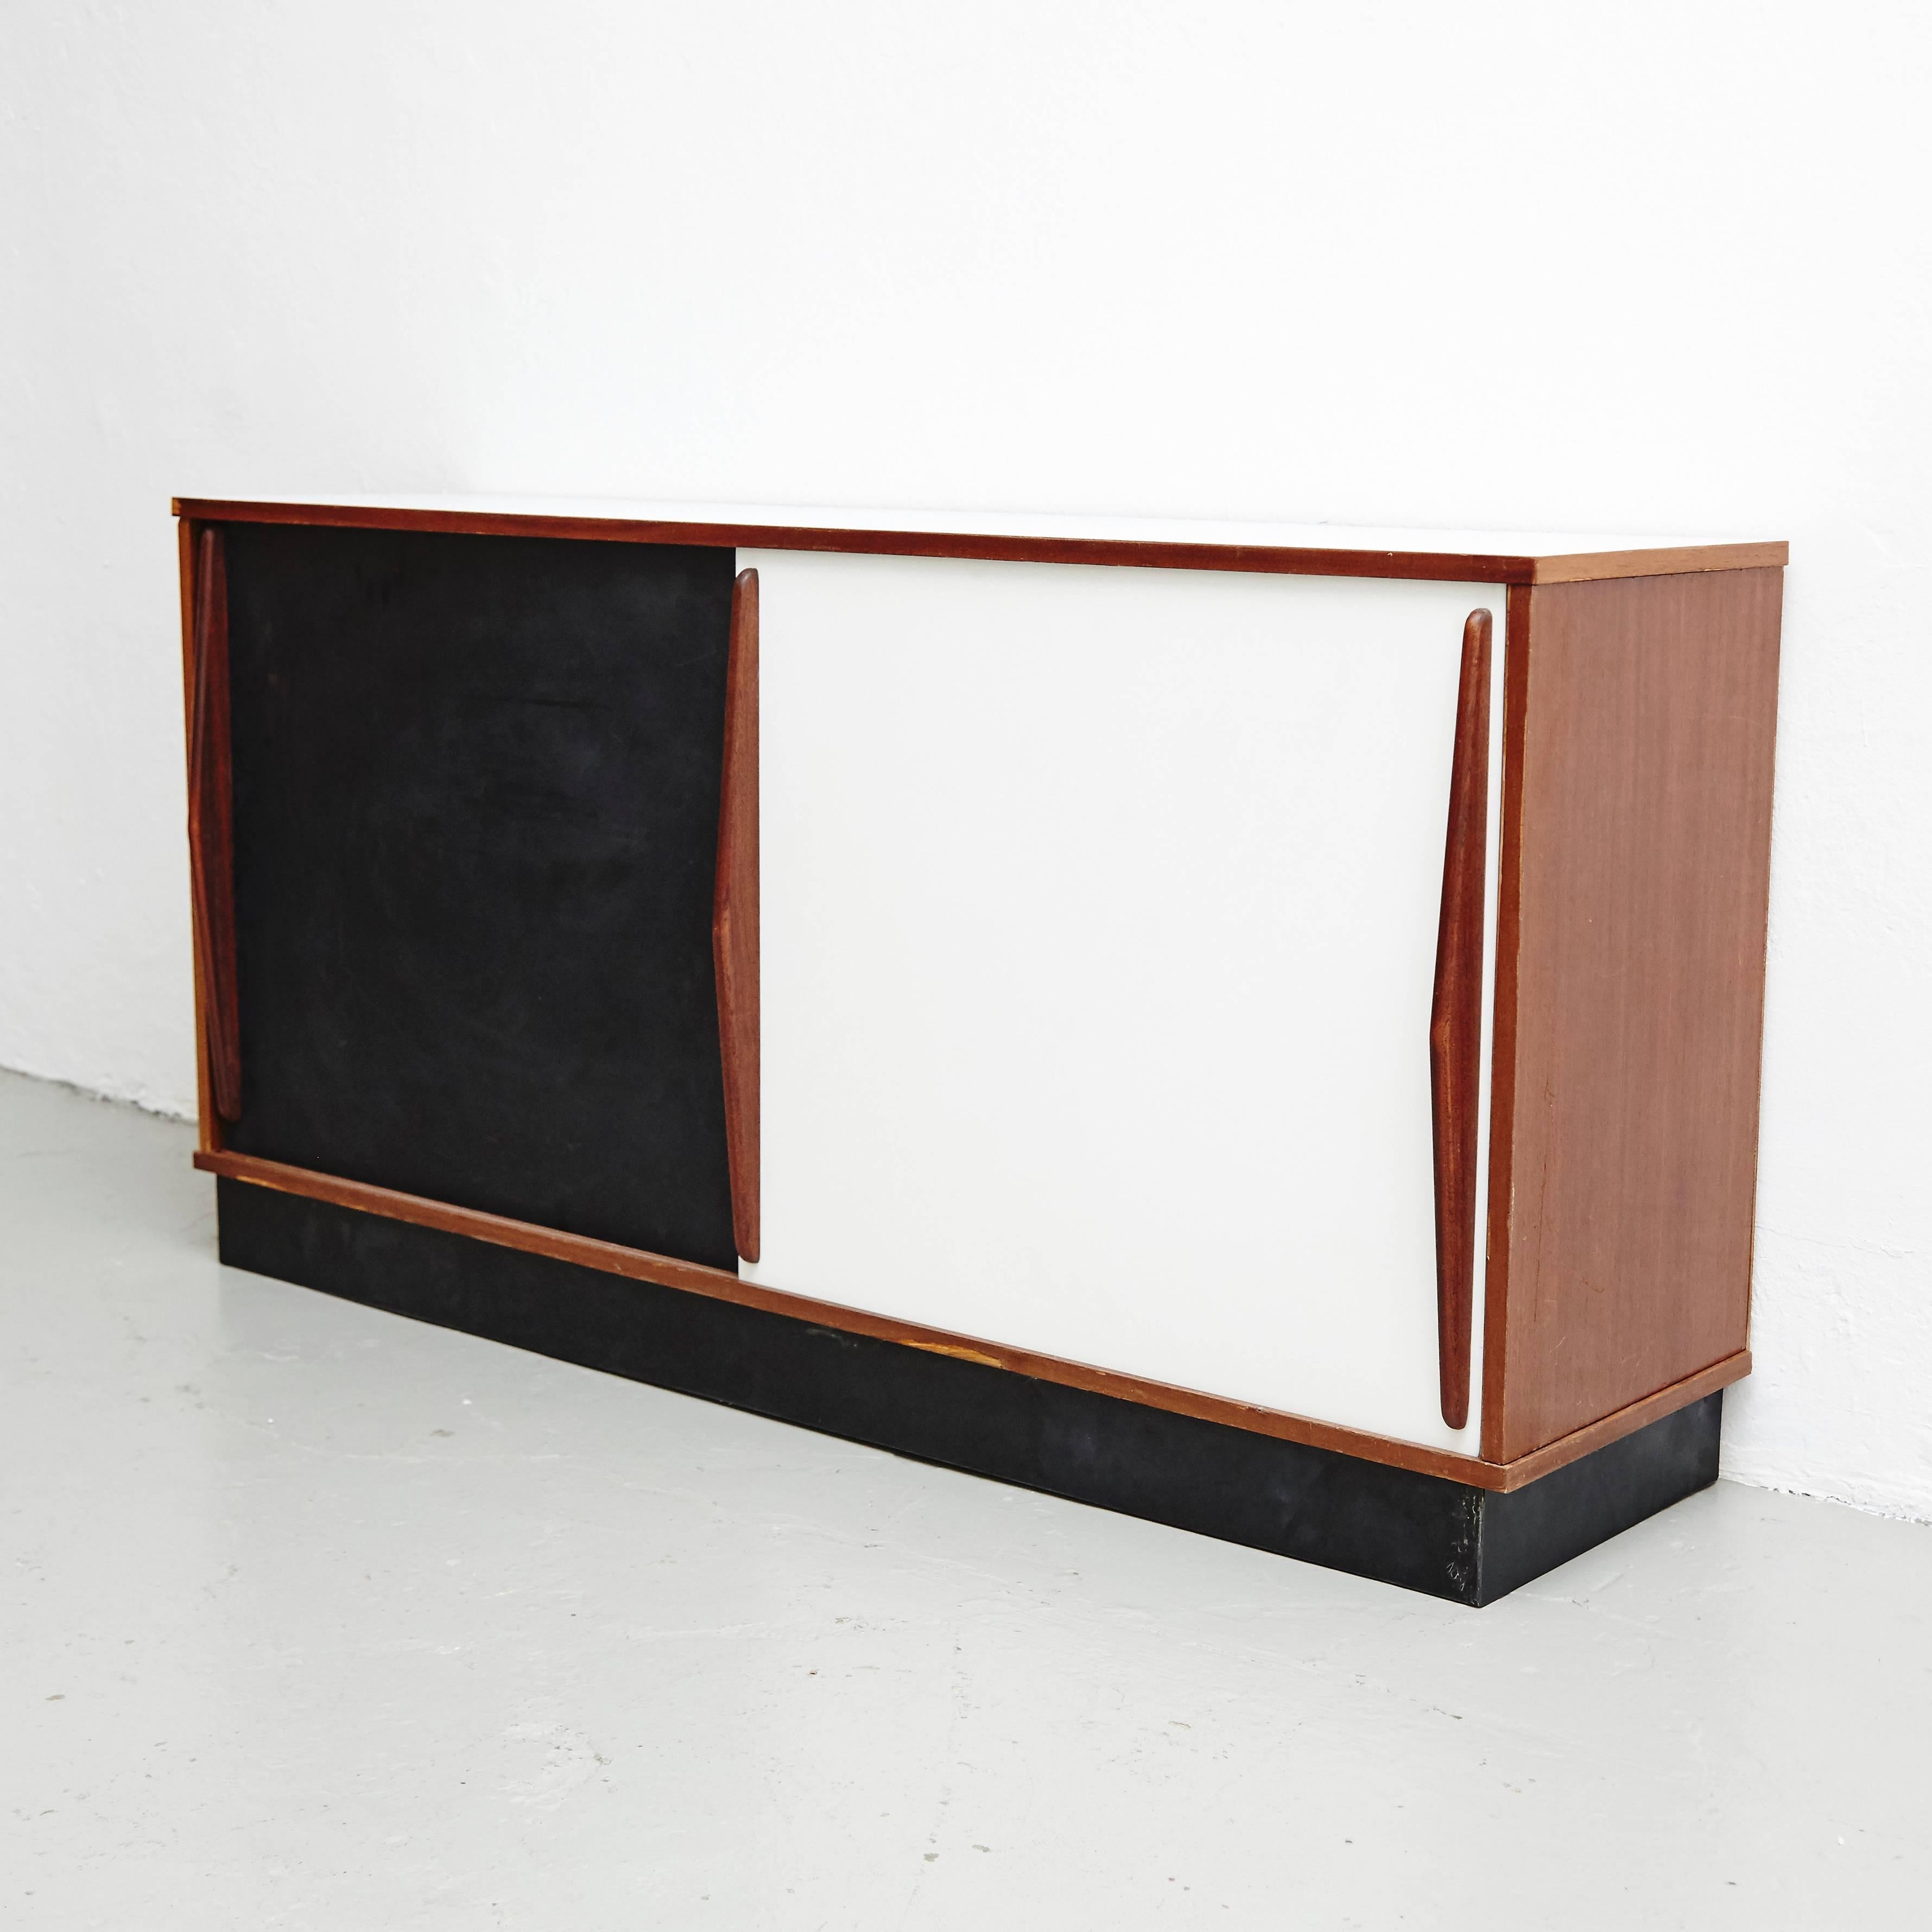 Sideboard designed by Charlotte Perriand, circa 1950.
Edited by Steph Simon (France.)
Wood structure and grips, lacquered sliding doors.

Provenence: Cansado, Mauritania (Africa.)

In good original condition, with minor wear consistent with